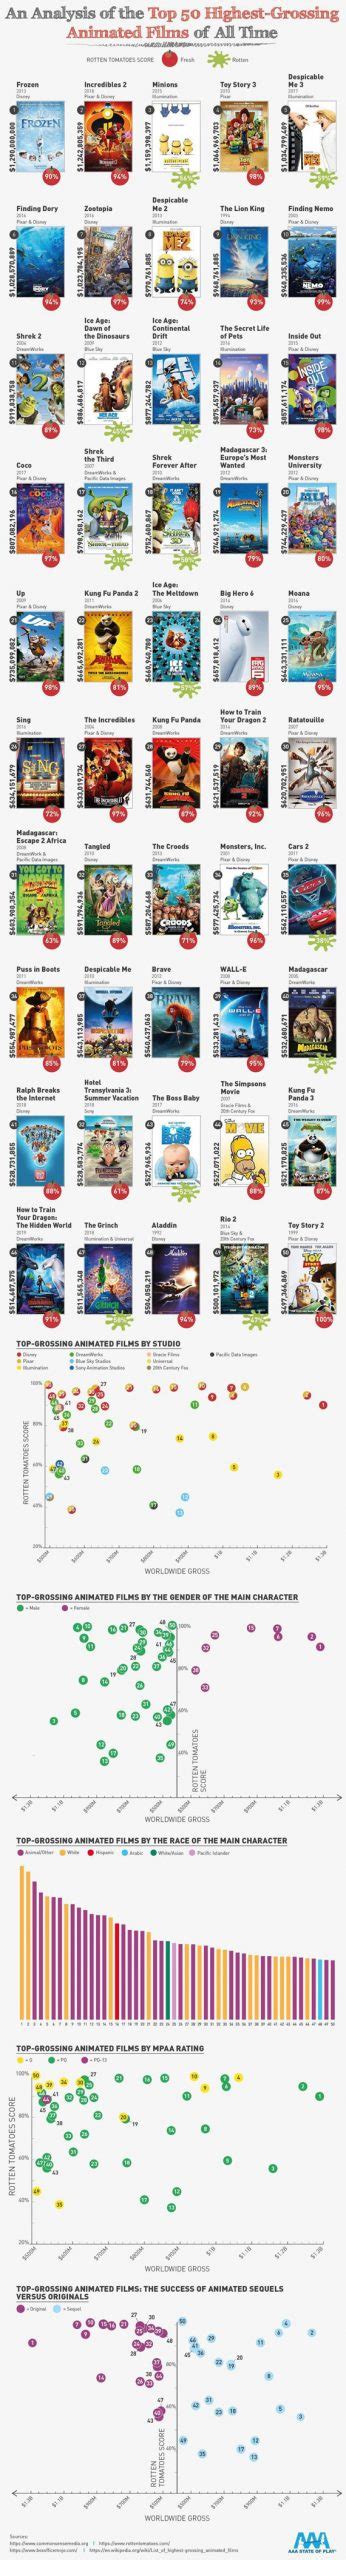 50 Highest Grossing Animated Films Of All Time Analyzed Best Infographics